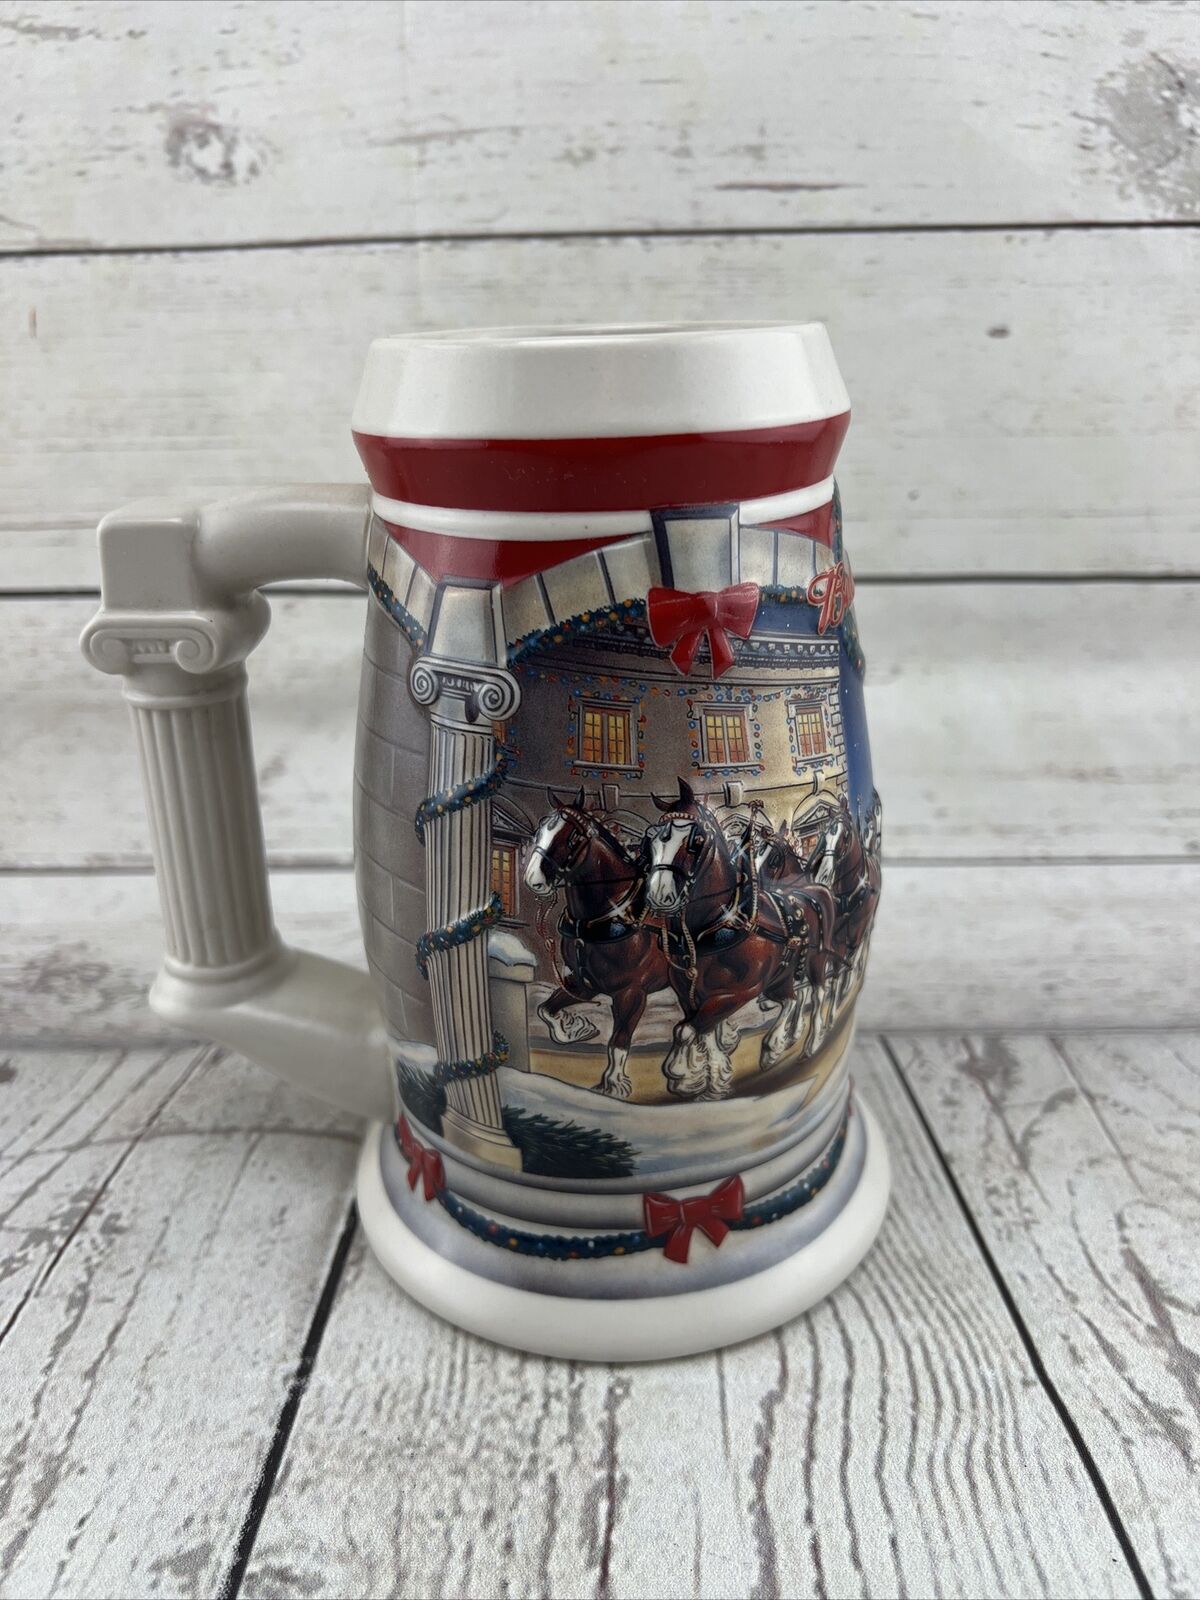 2001 Anheuser Busch Budweiser Holiday at the Capital Stein Mug Collector Series